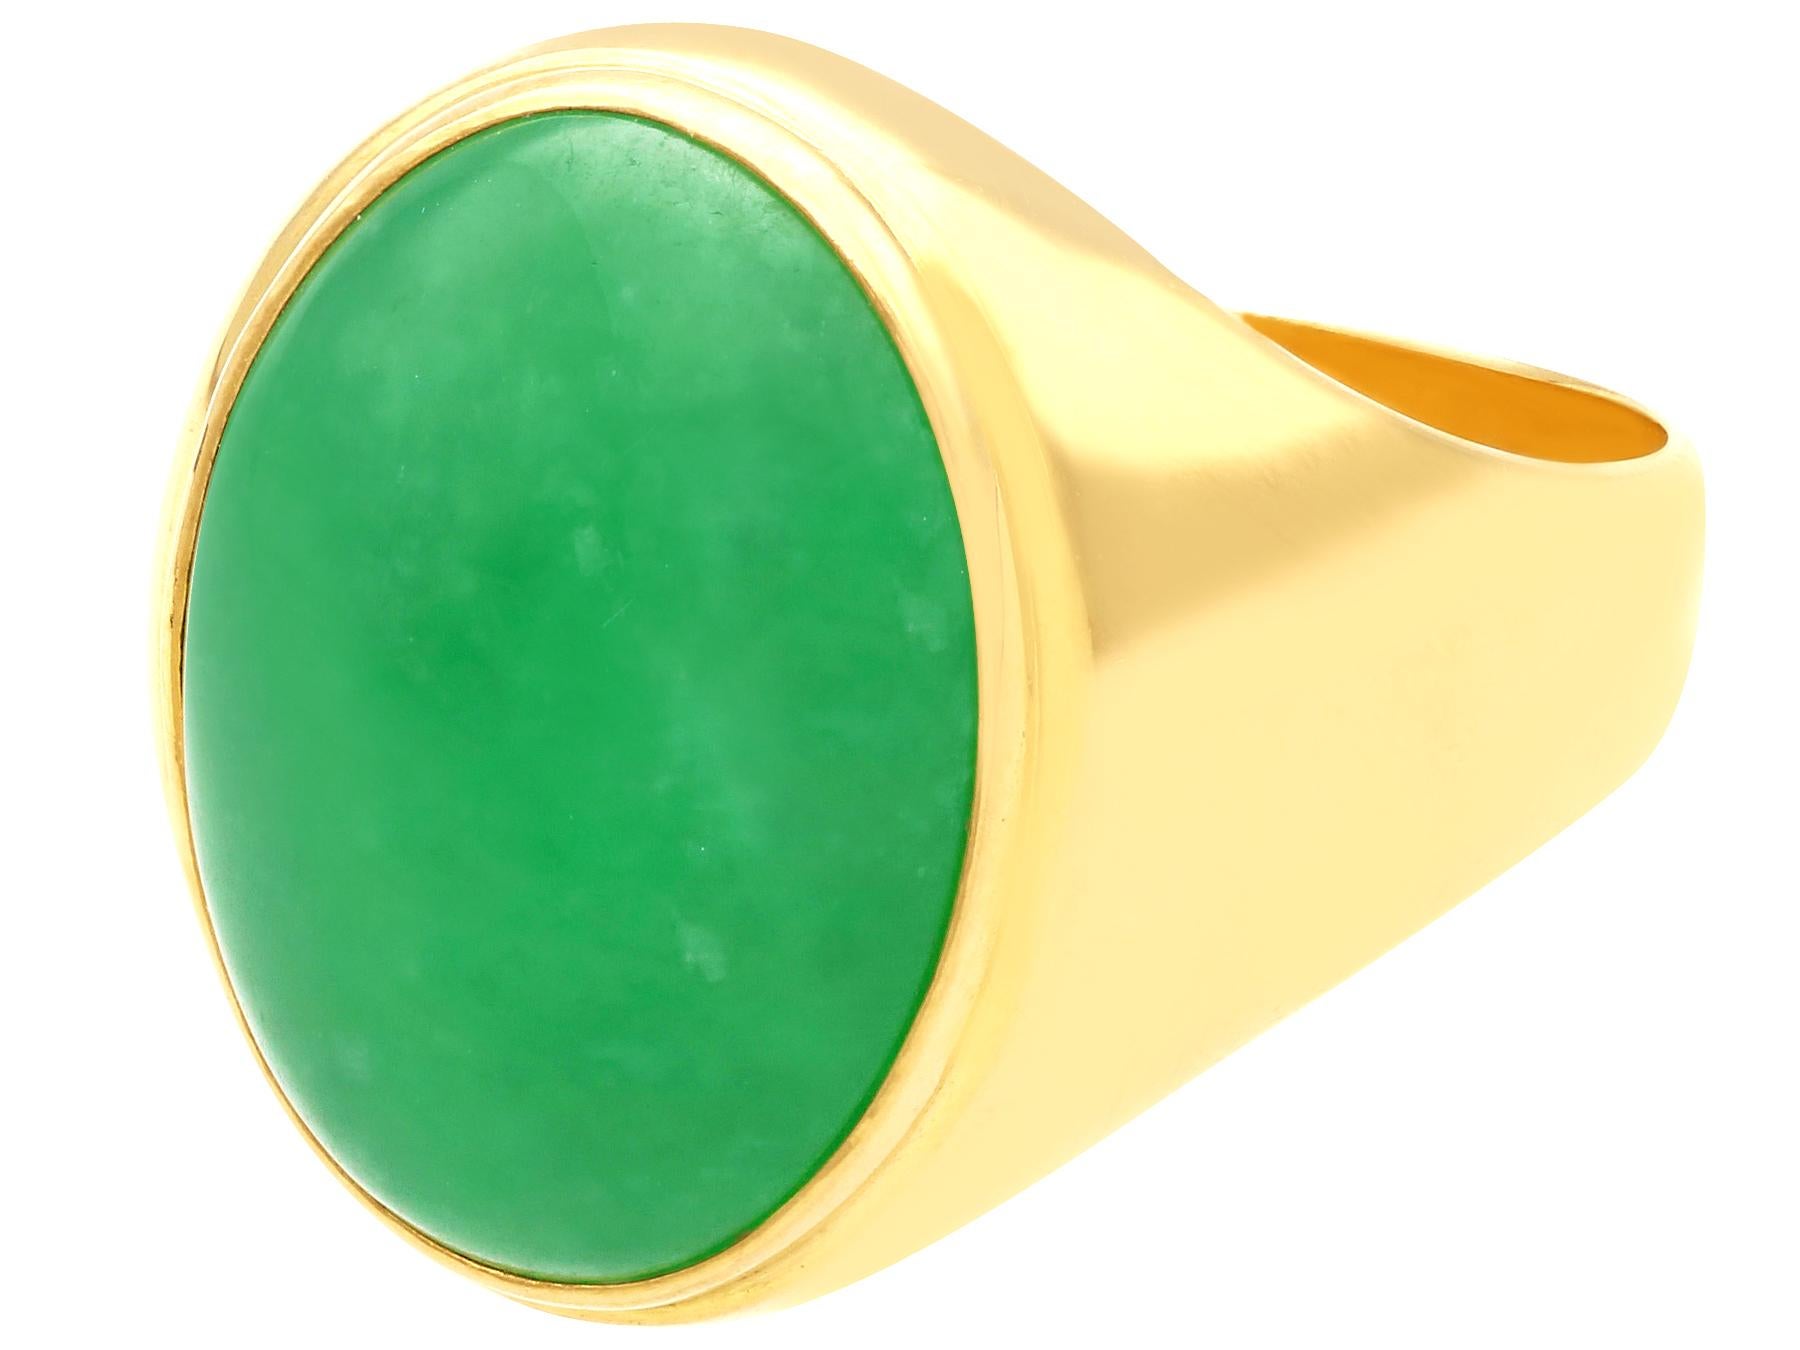 An impressive vintage 1990s 12.95 carat jade and 18 karat yellow gold cocktail ring; part of our diverse vintage jewelry and estate jewelry collections.

This fine and impressive vintage cabochon cut gemstone ring has been crafted in 18k yellow